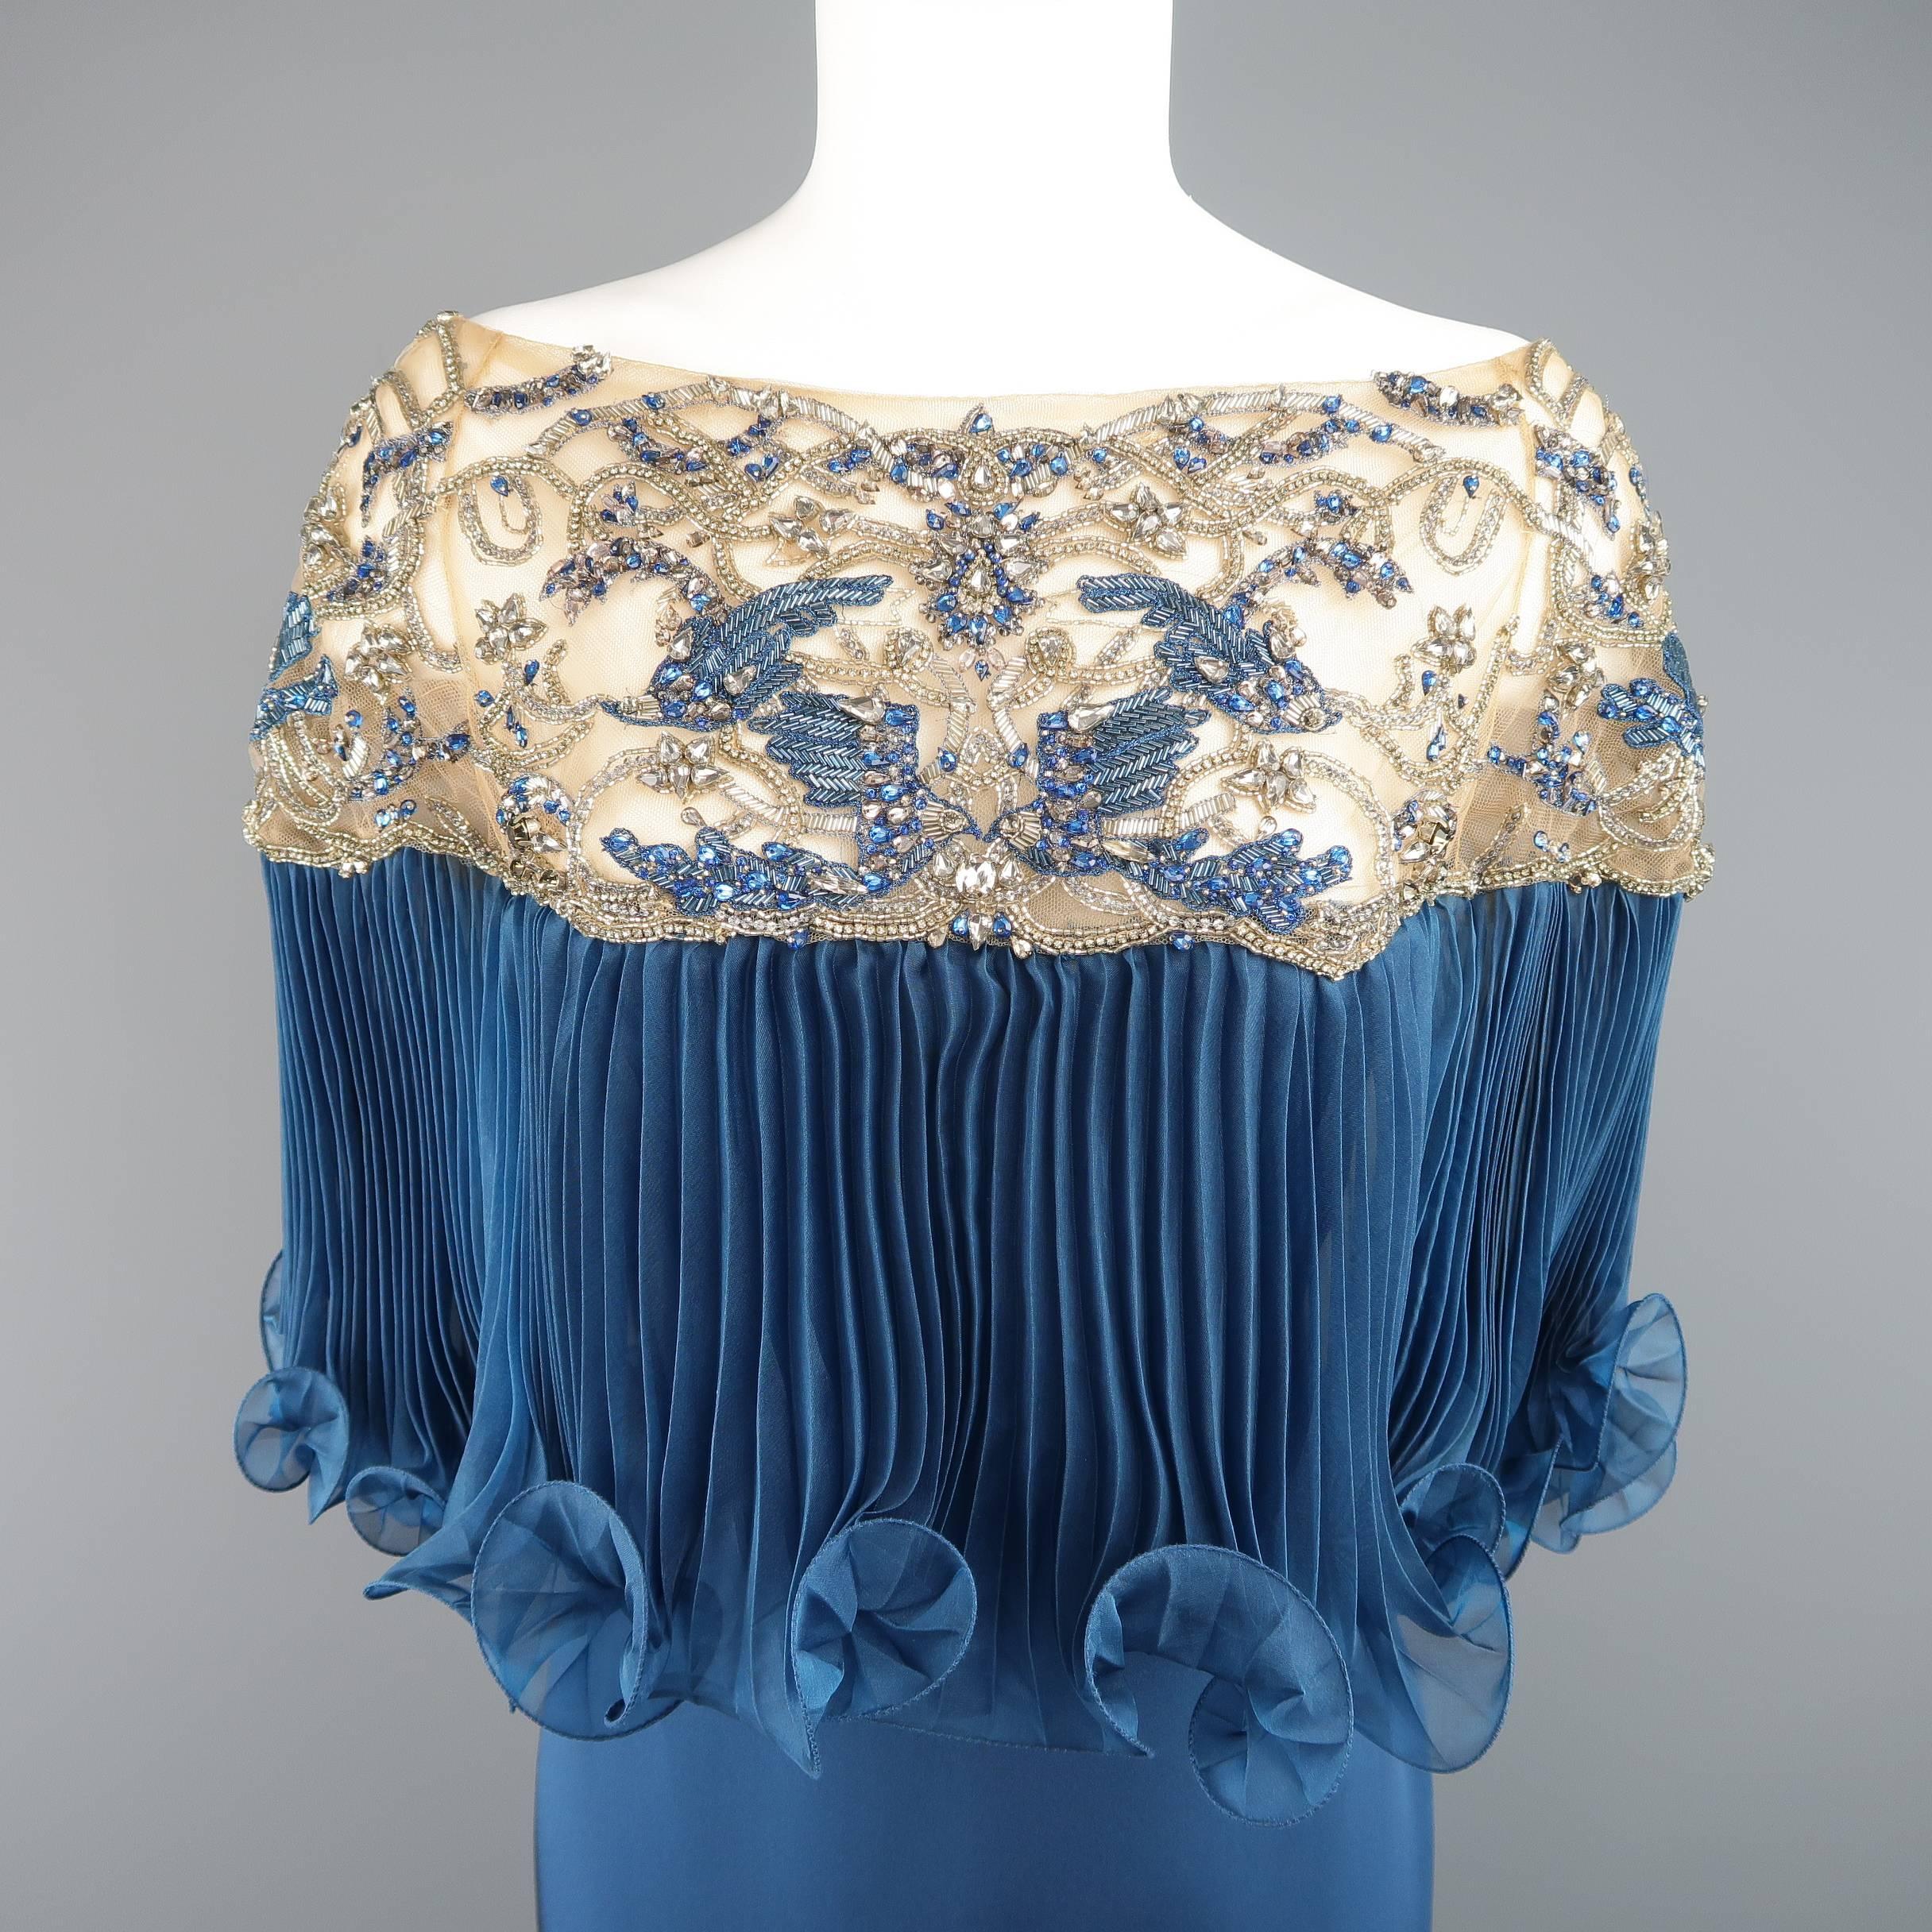 Marchesa cocktail dress features a beige mesh of the shoulder panel with silver and blue crystal beadwork, pleated ruffle capelet, and silk satin skirt.  Made in USA.
 
Excellent Pre-Owned Condition.
Marked: 10
 
Measurements:
 
Shoulder: 14